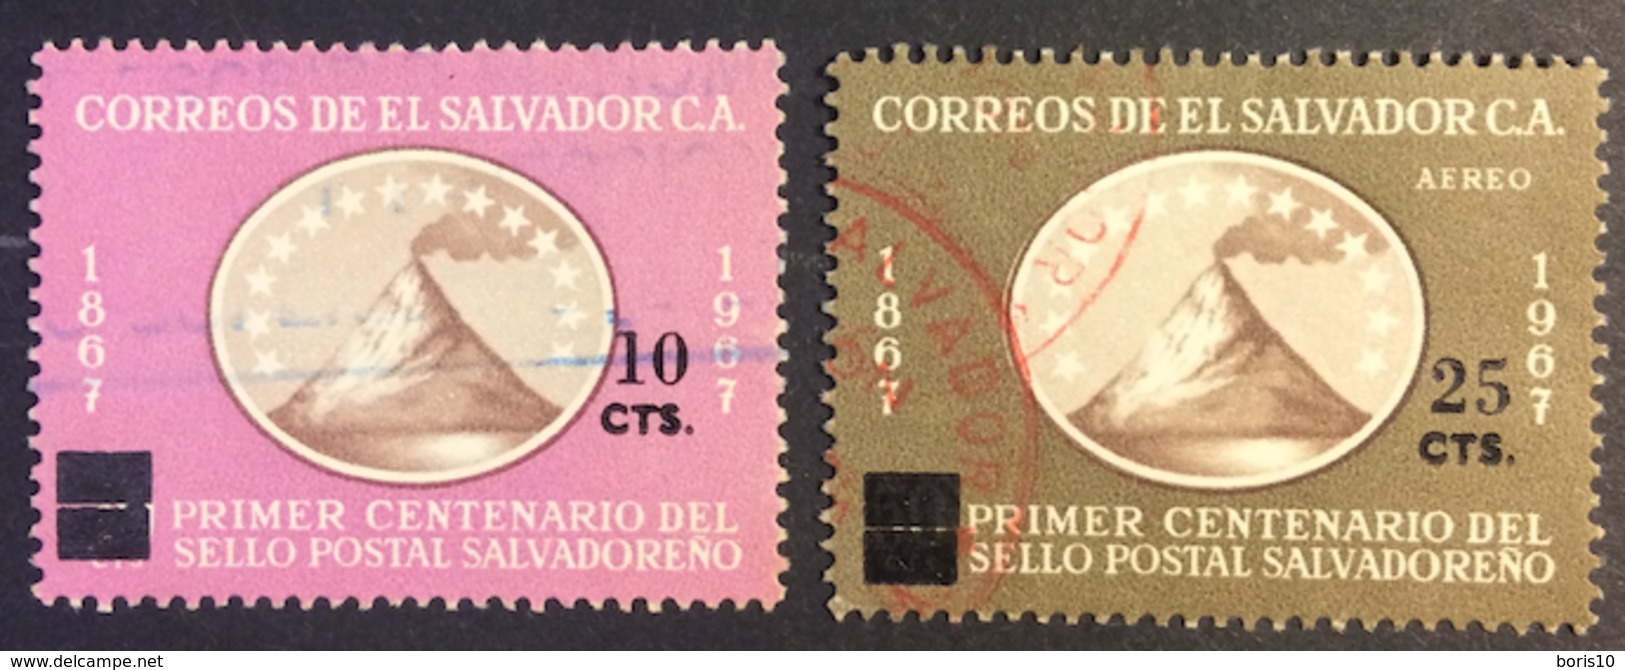 El Salvador Used  1973 Stamps Of 1967 Surcharged, The Mountains, Volcano, Airmail - Salvador